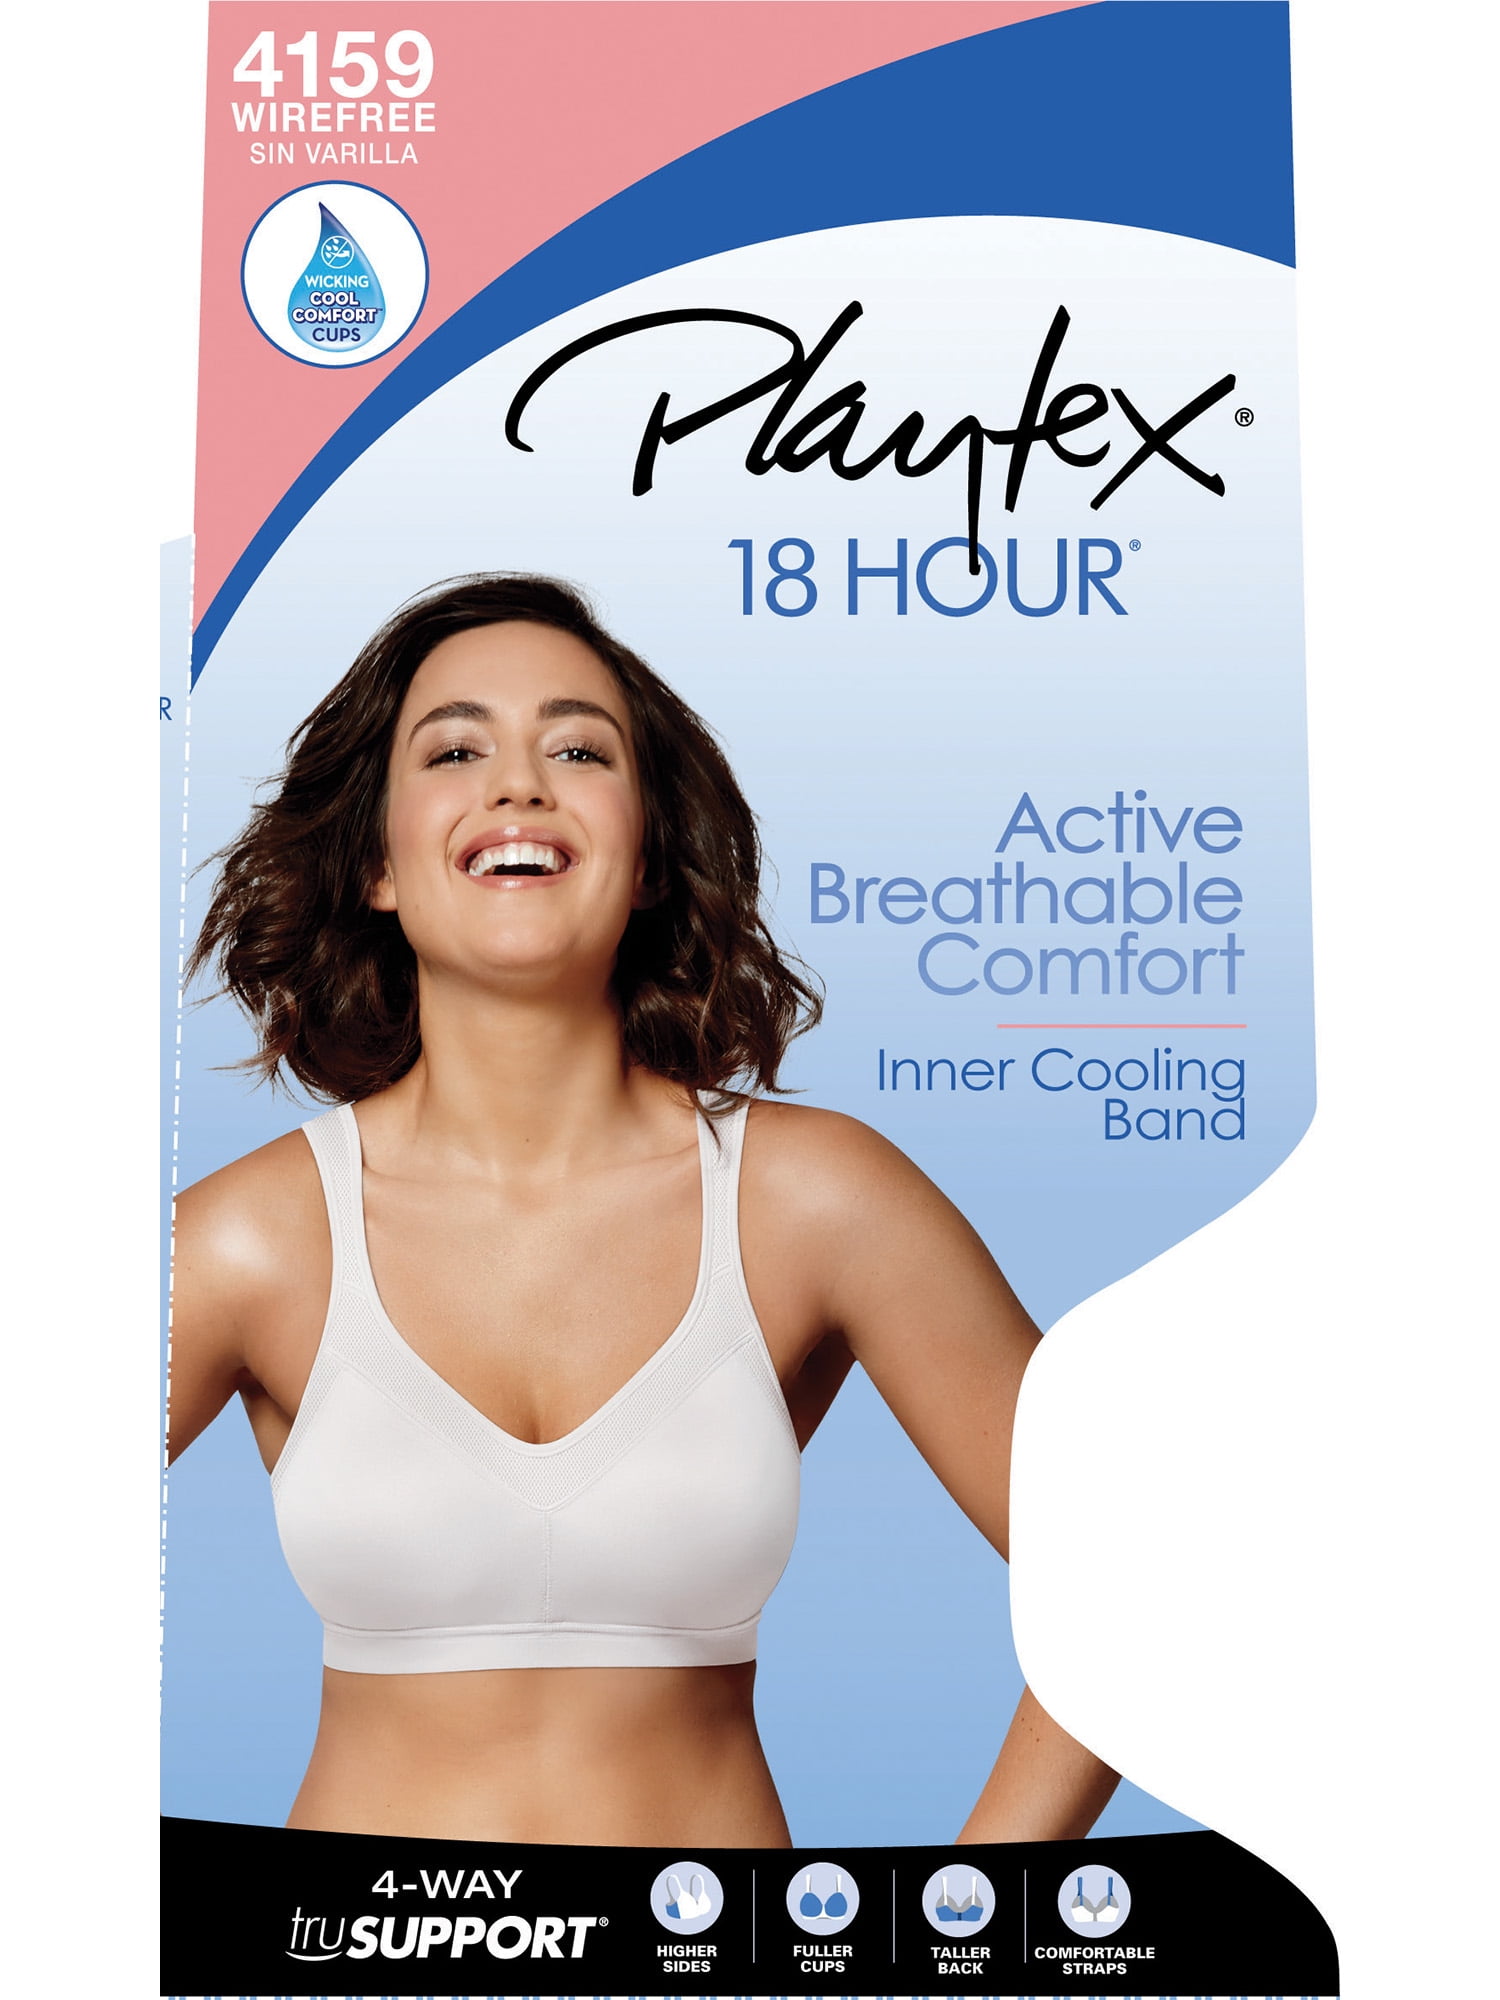 Just My Size: Warm Up for the Holidays! $14.99 Playtex 18 Hour Bras